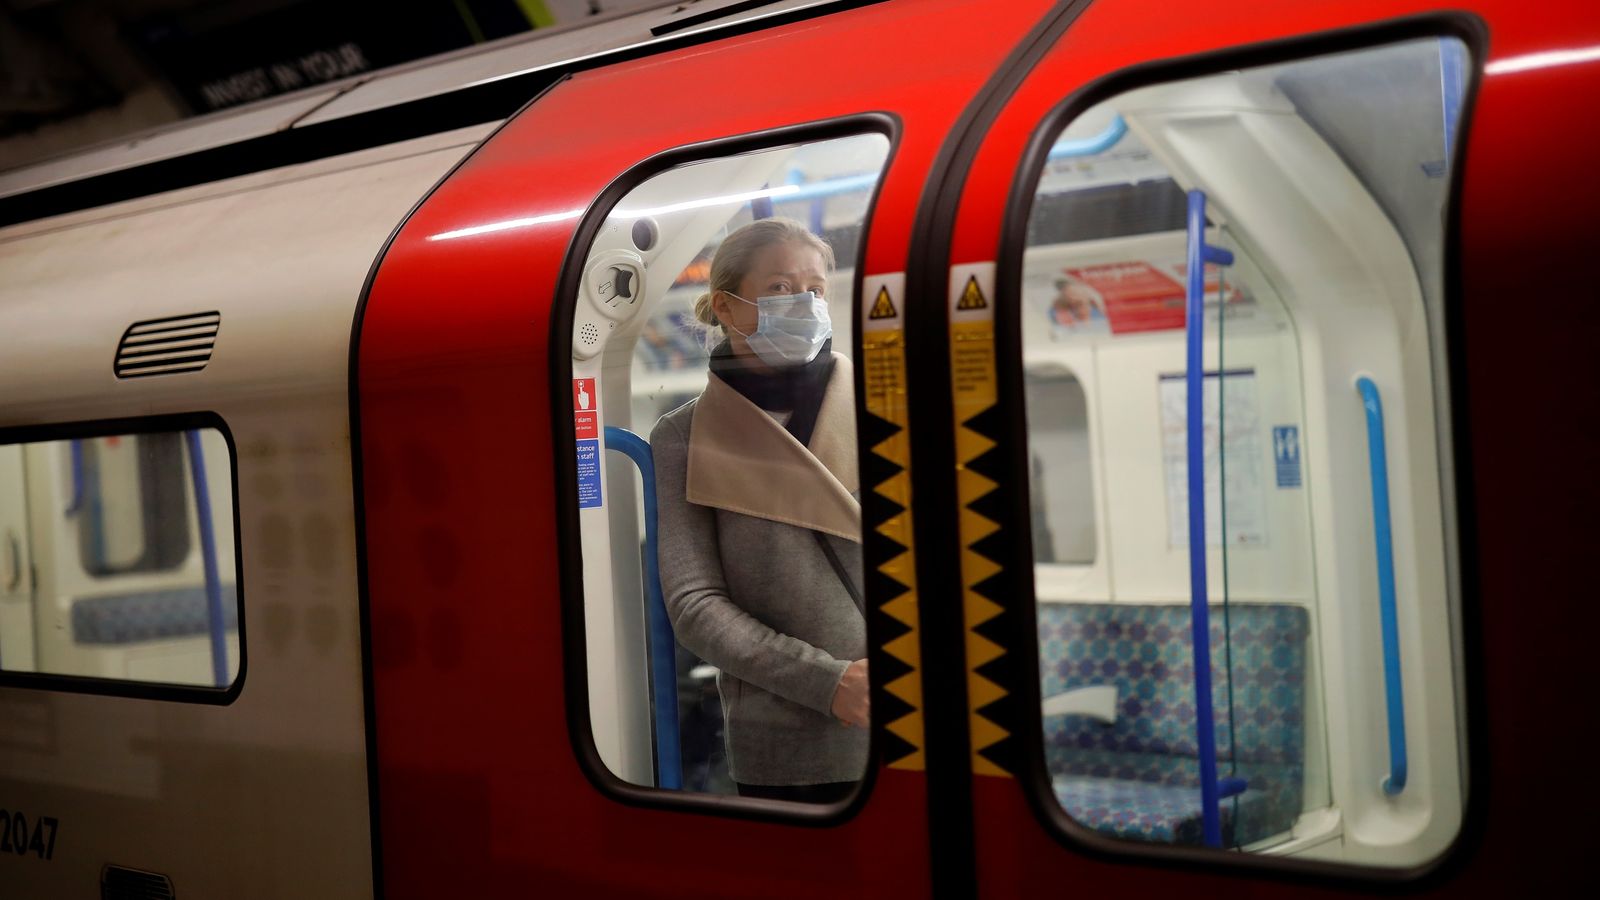 A commuter wearing a face mask on the London Underground earlier this week.